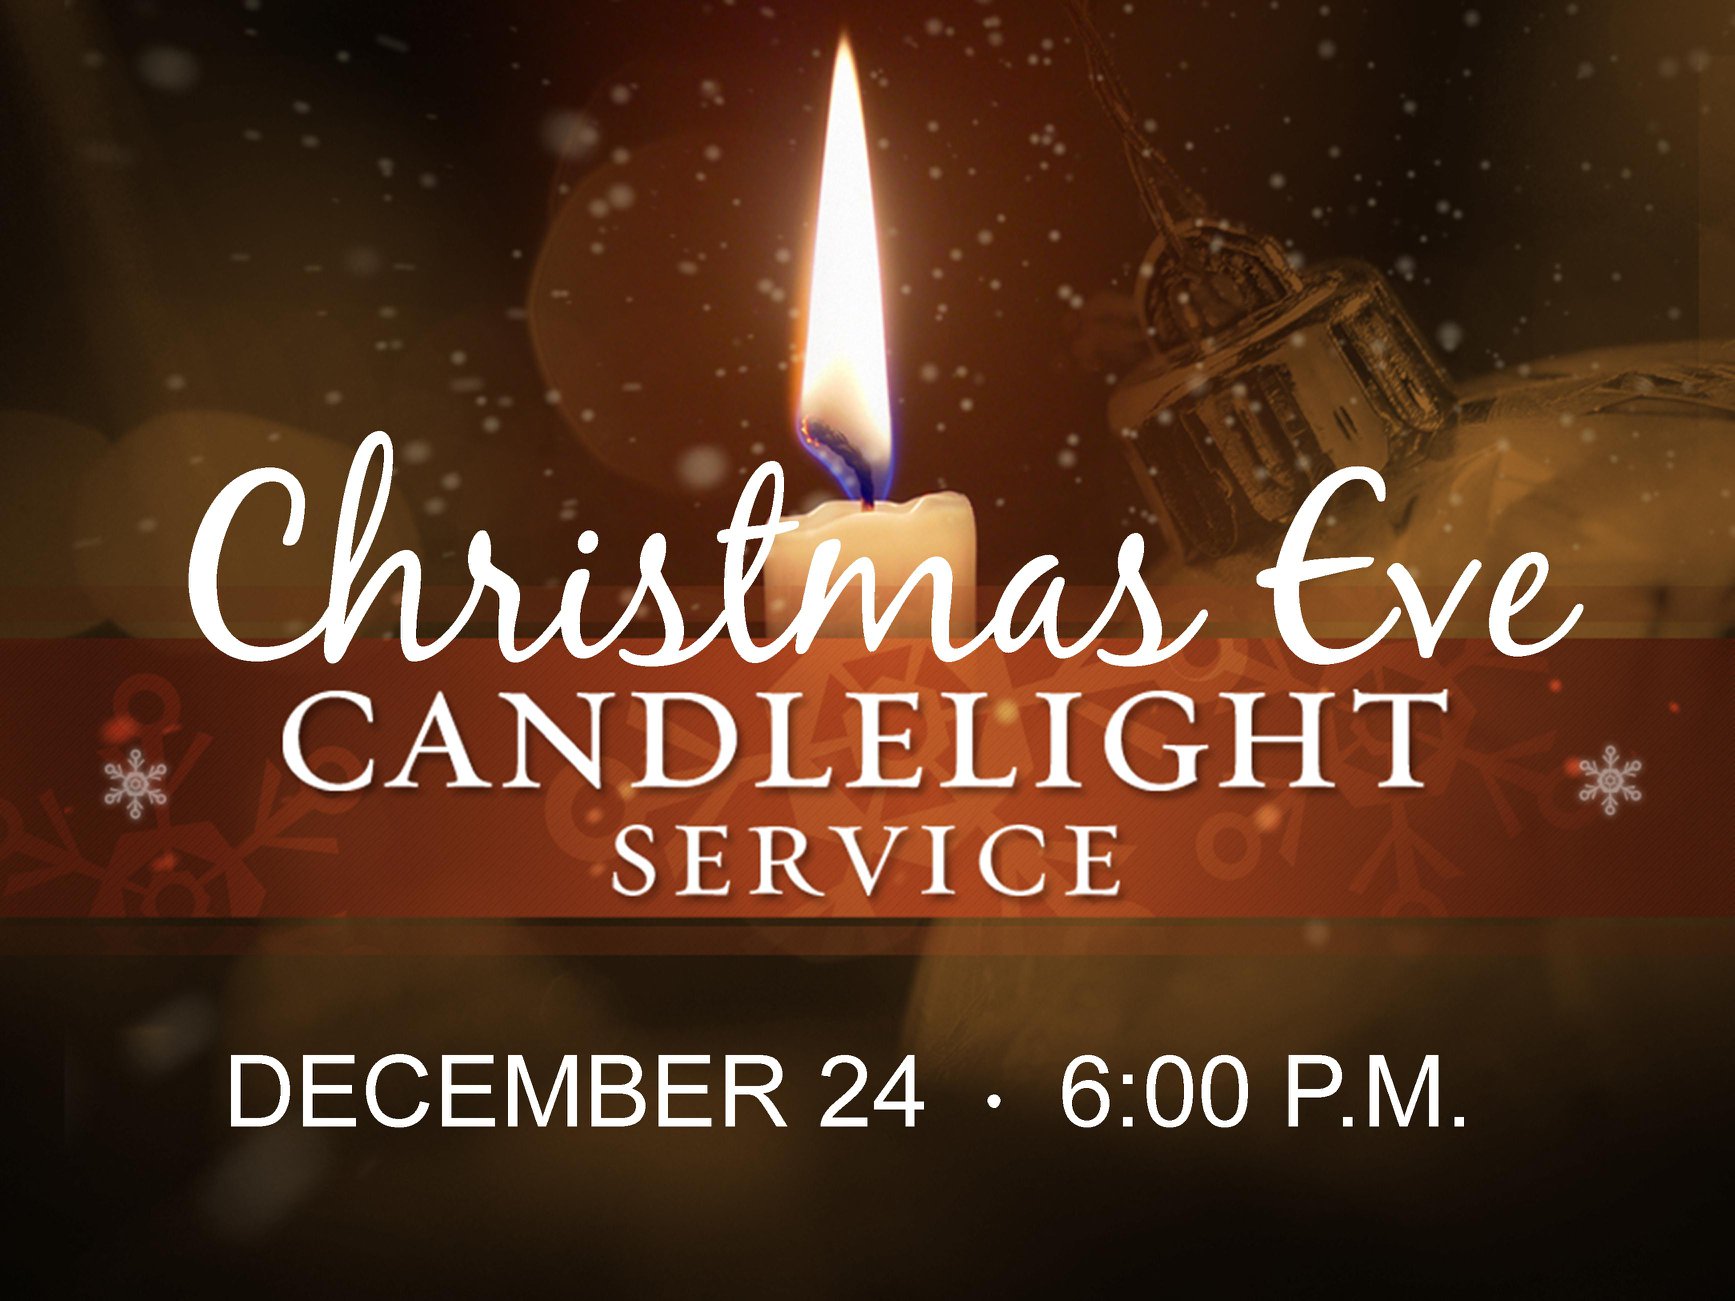 Christmas Eve Candlelight Service at Poinciana United Methodist Church